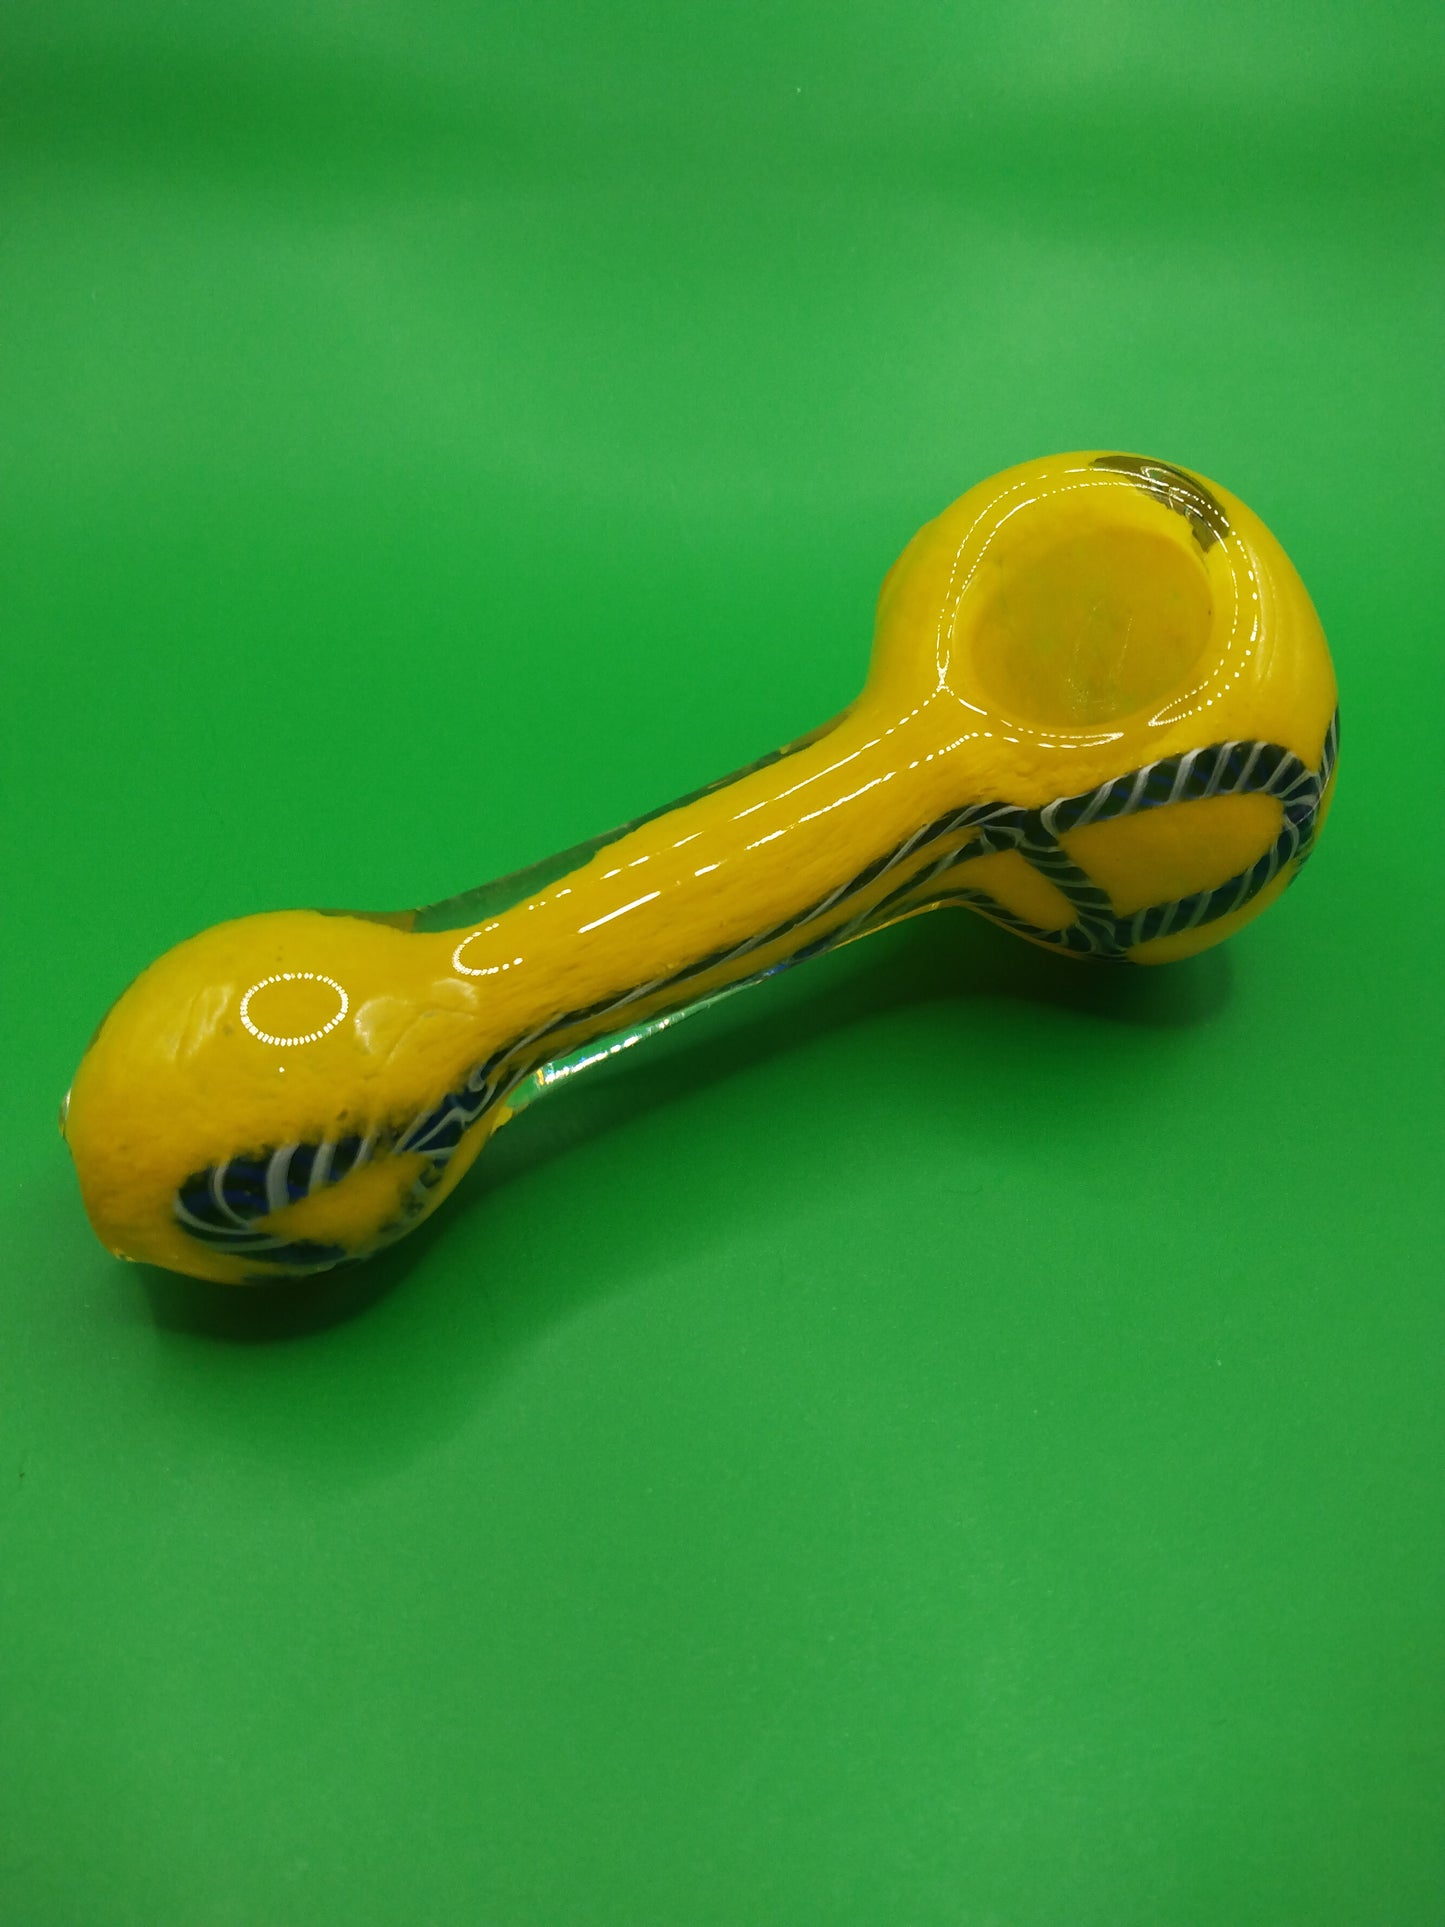 4" Yellow and Blue Striped Glass Hand Pipe (Spoon)